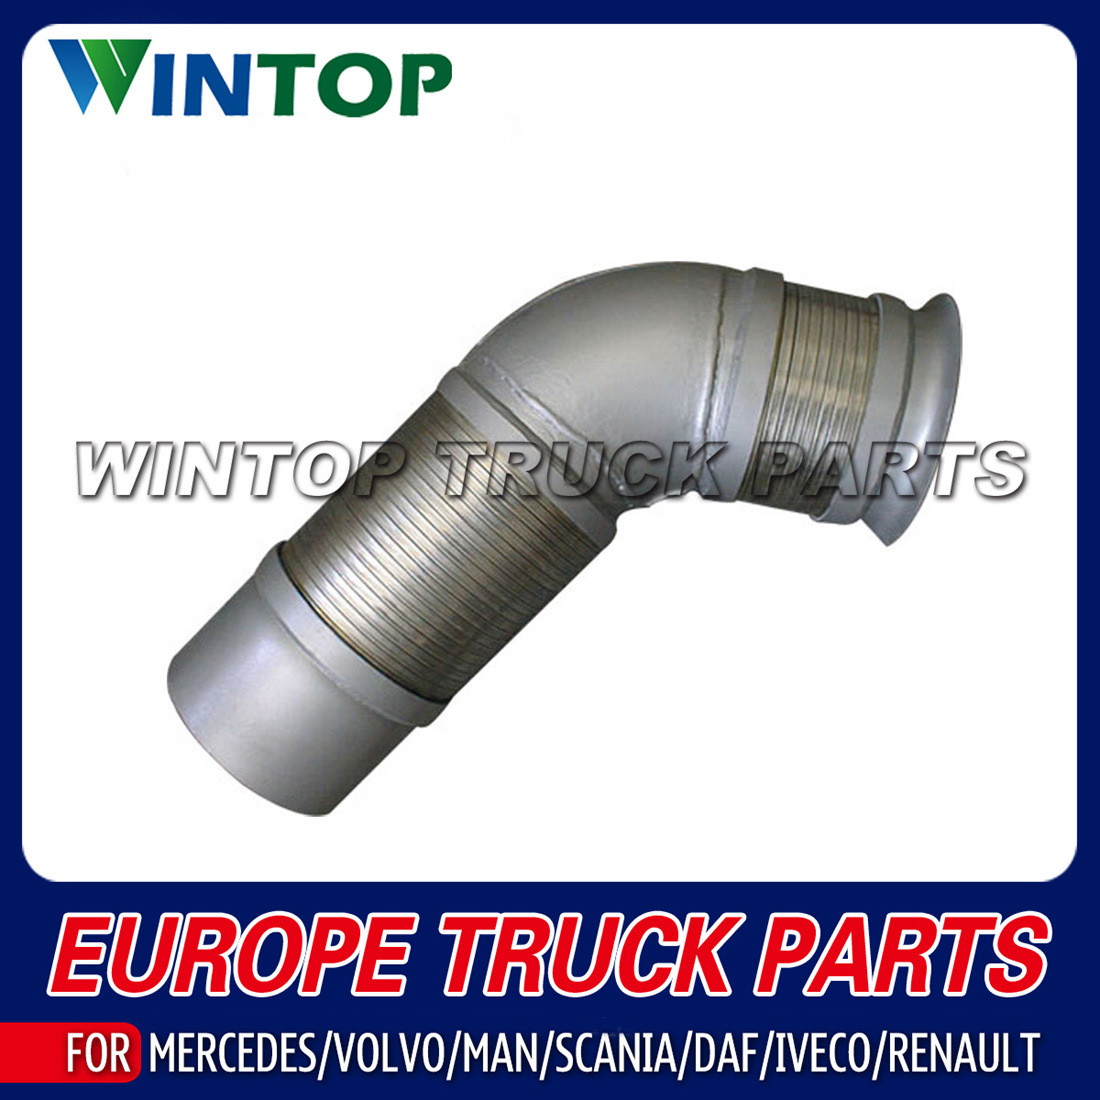 Exhaust Flexible Pipe for Mercedes Benz Truck Parts OEM No.: 942 490 2219